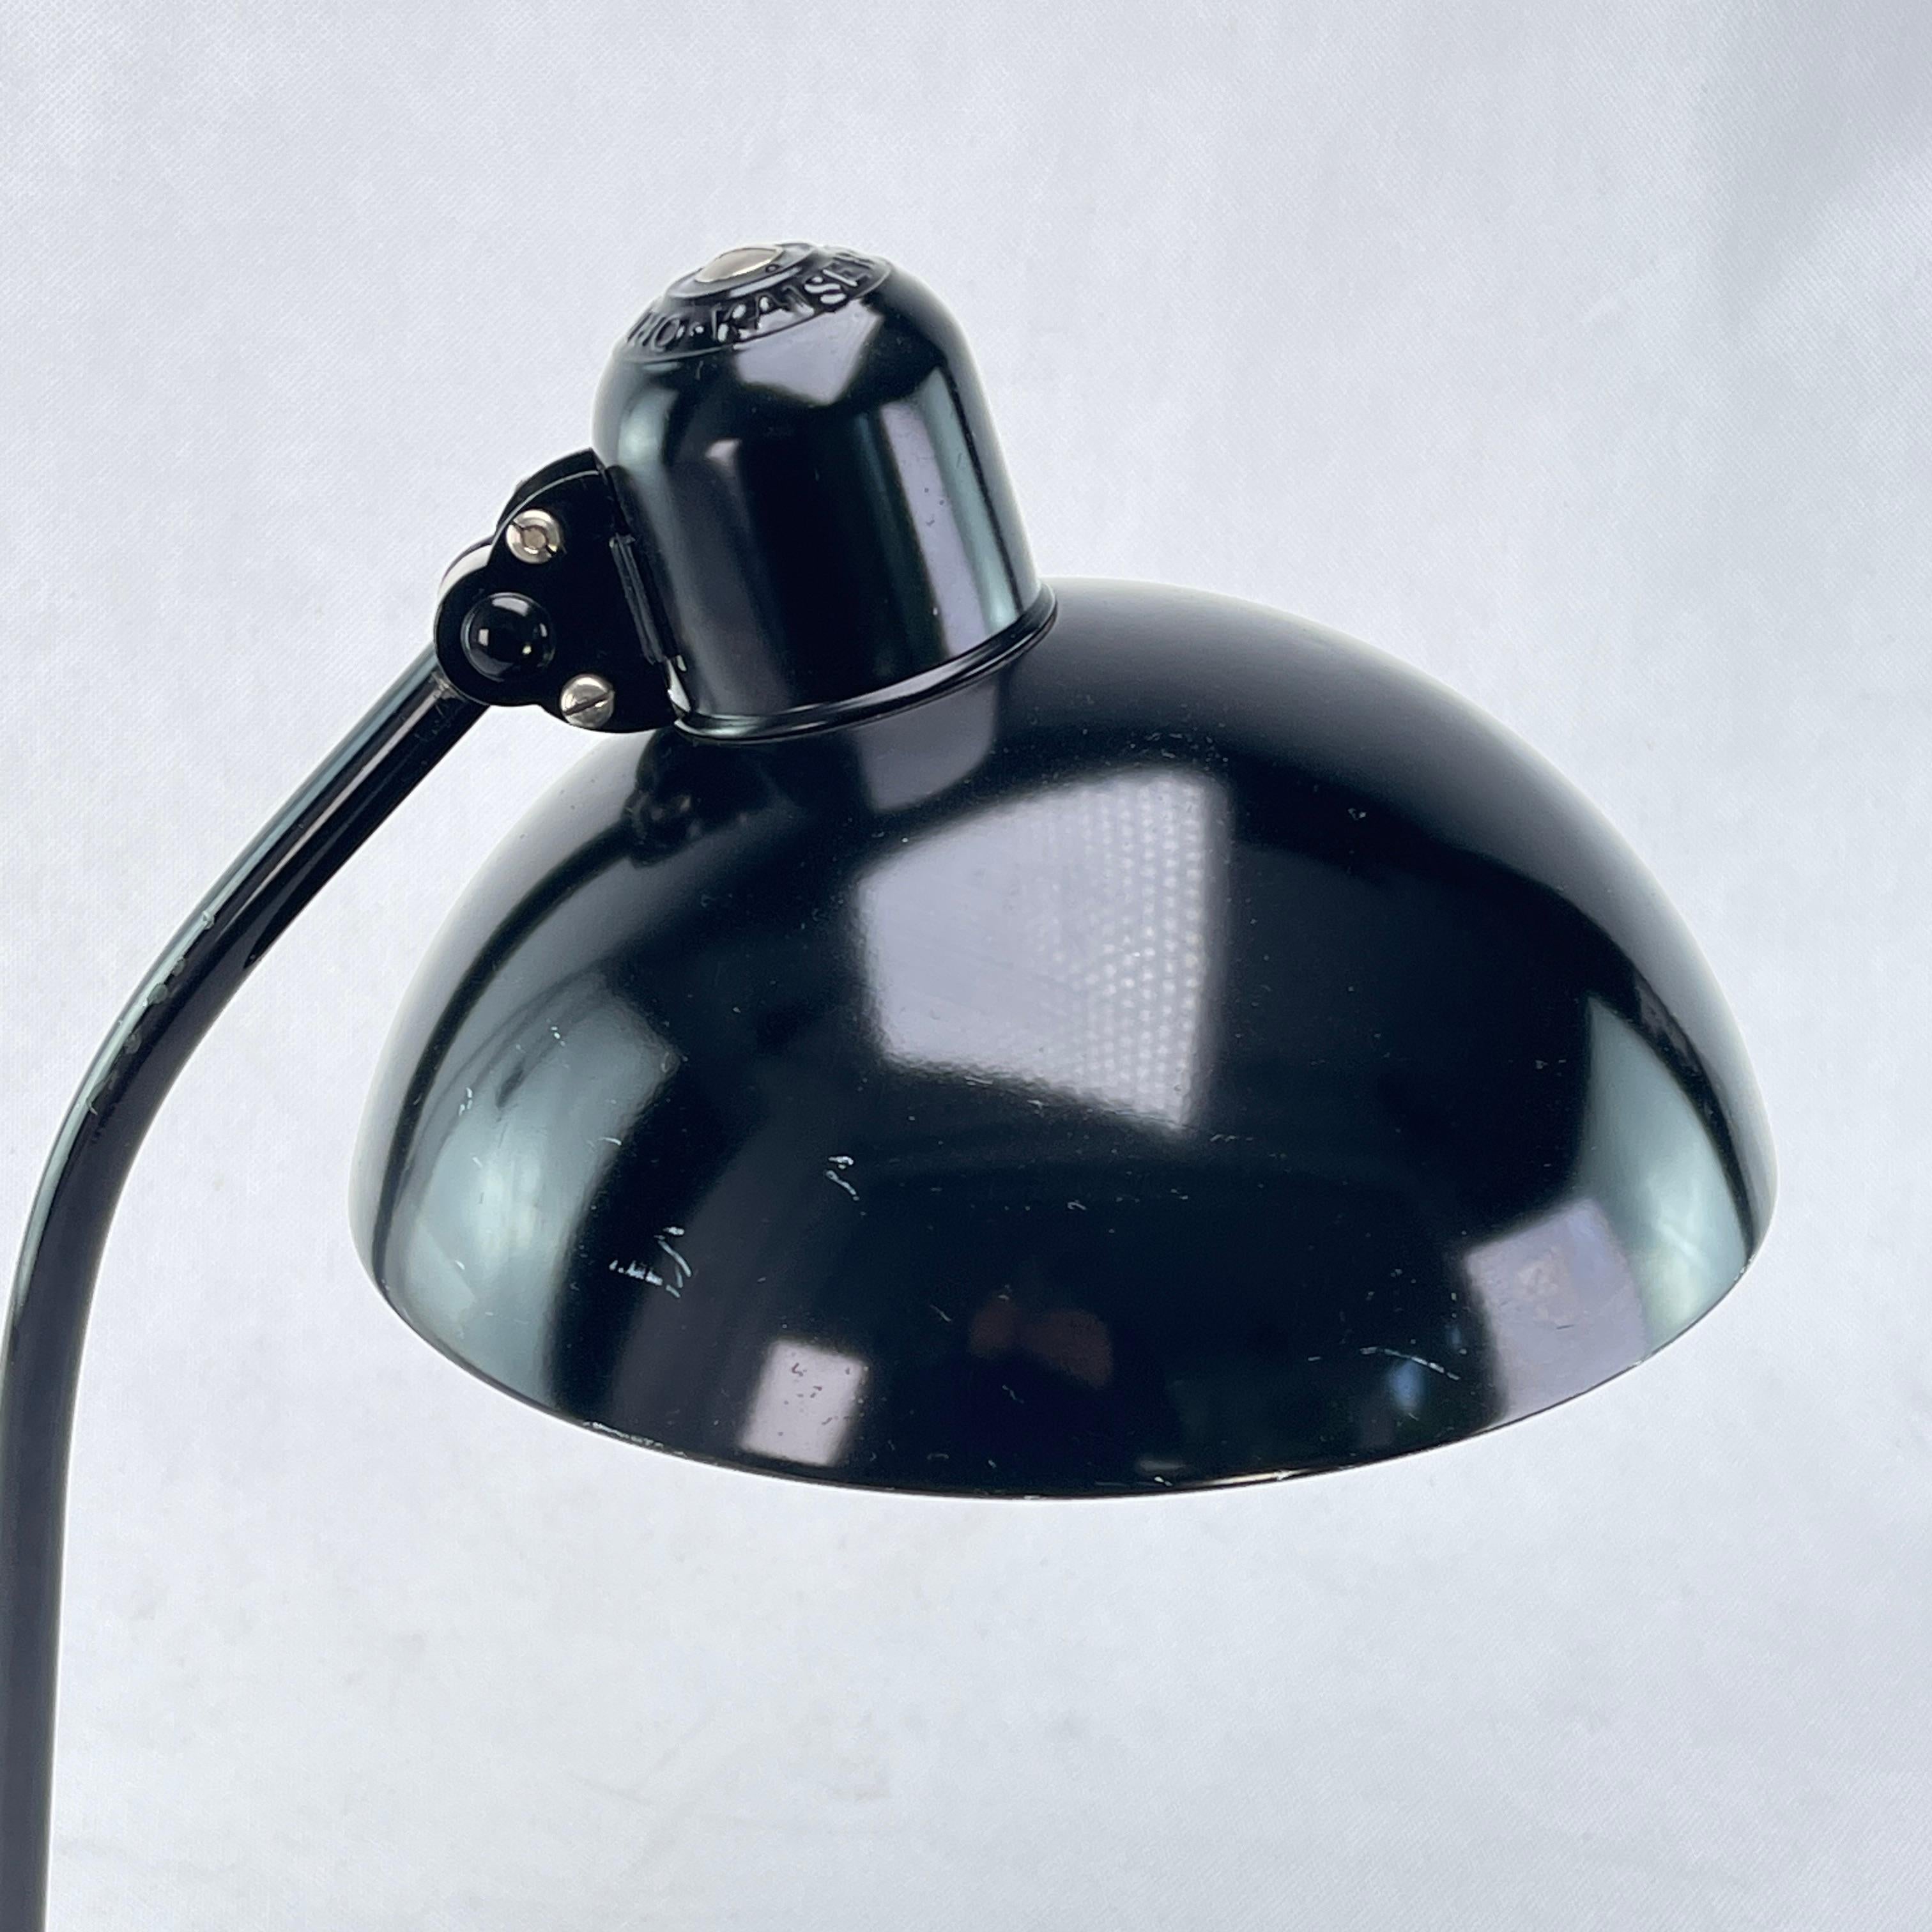 Table Lamp from Kaiser Idell - 1930s.

Kaiser Idell table lamp model 6556 is a timeless design piece designed by Christian Dell in the 1930s. This table lamp embodies the elegance and minimalist style of the Bauhaus, a major art and design school of